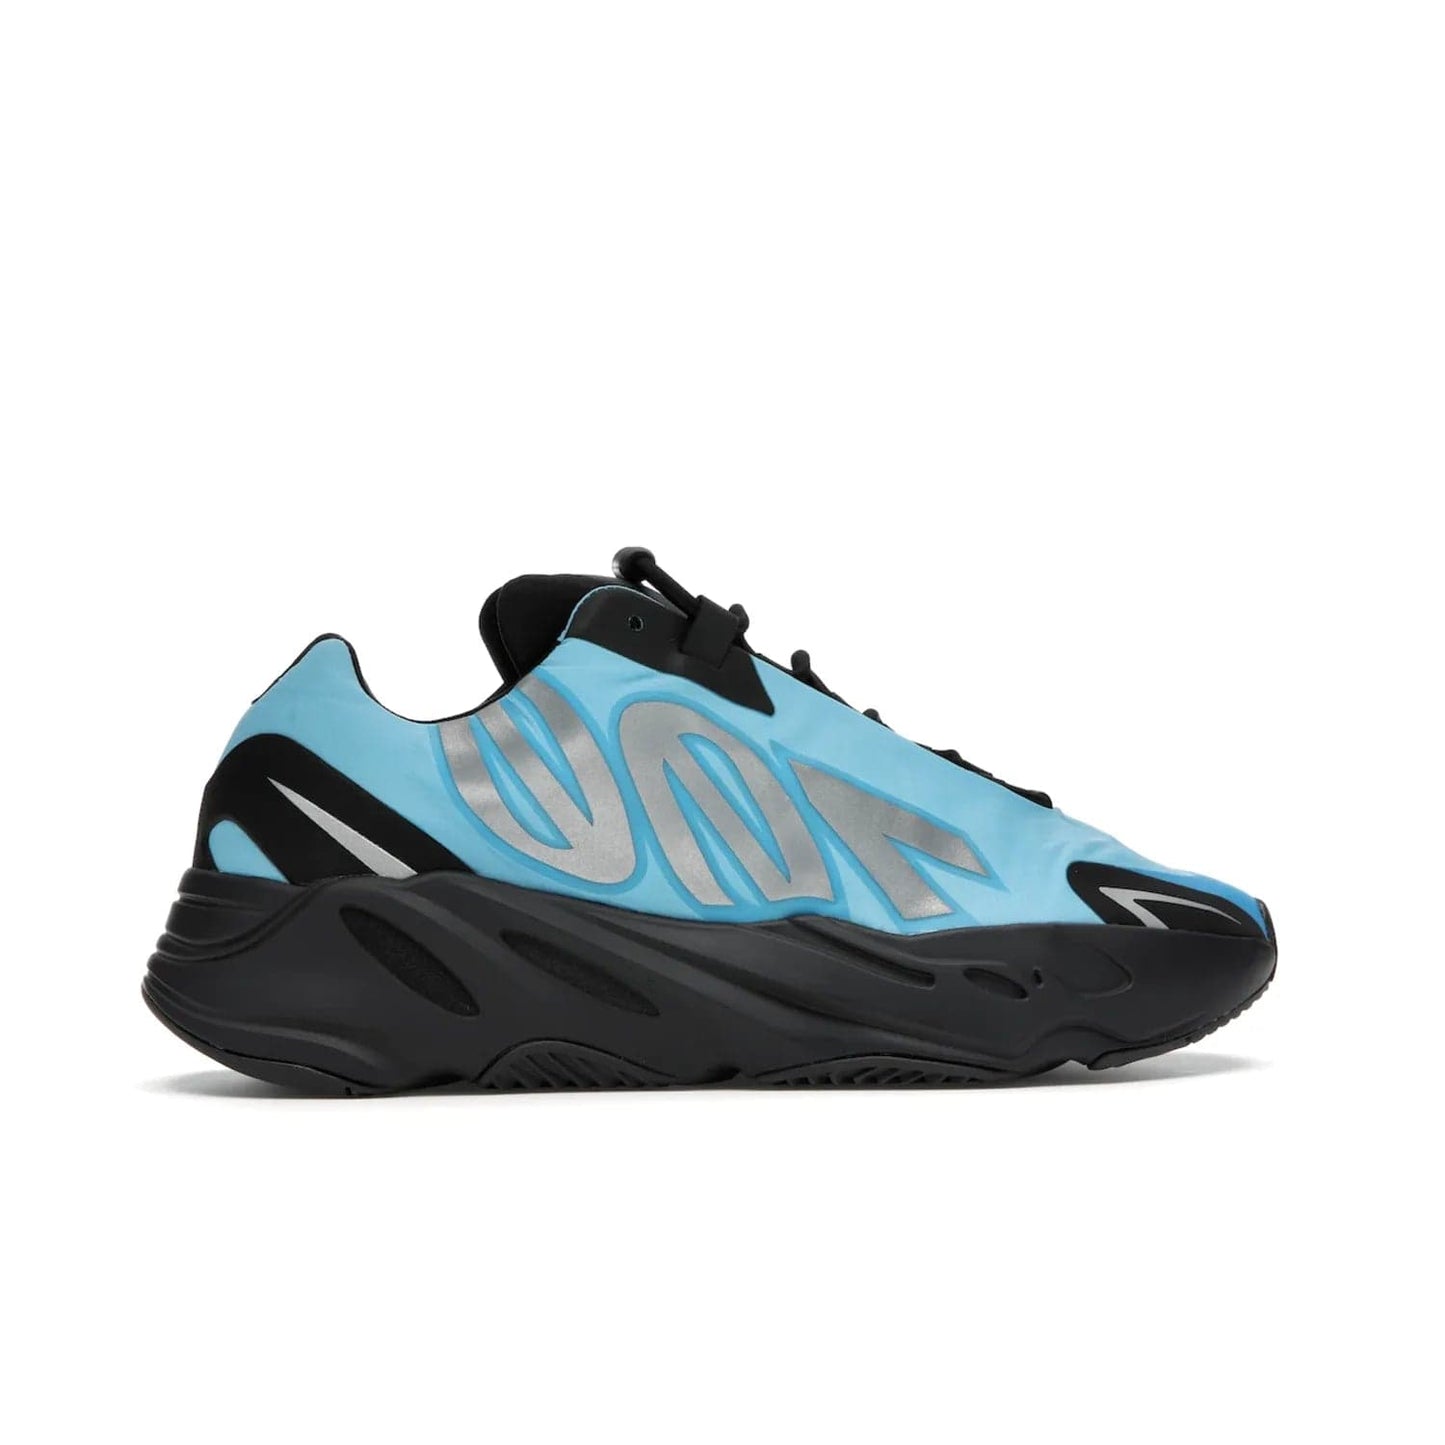 adidas Yeezy Boost 700 MNVN Bright Cyan - Image 36 - Only at www.BallersClubKickz.com - The adidas Yeezy Boost 700 MNVN features a Bright Cyan nylon upper with iconic "700" graphics and a sculptural black Boost sole for superior style and comfort. Step into legendary style and comfort in June 2021.